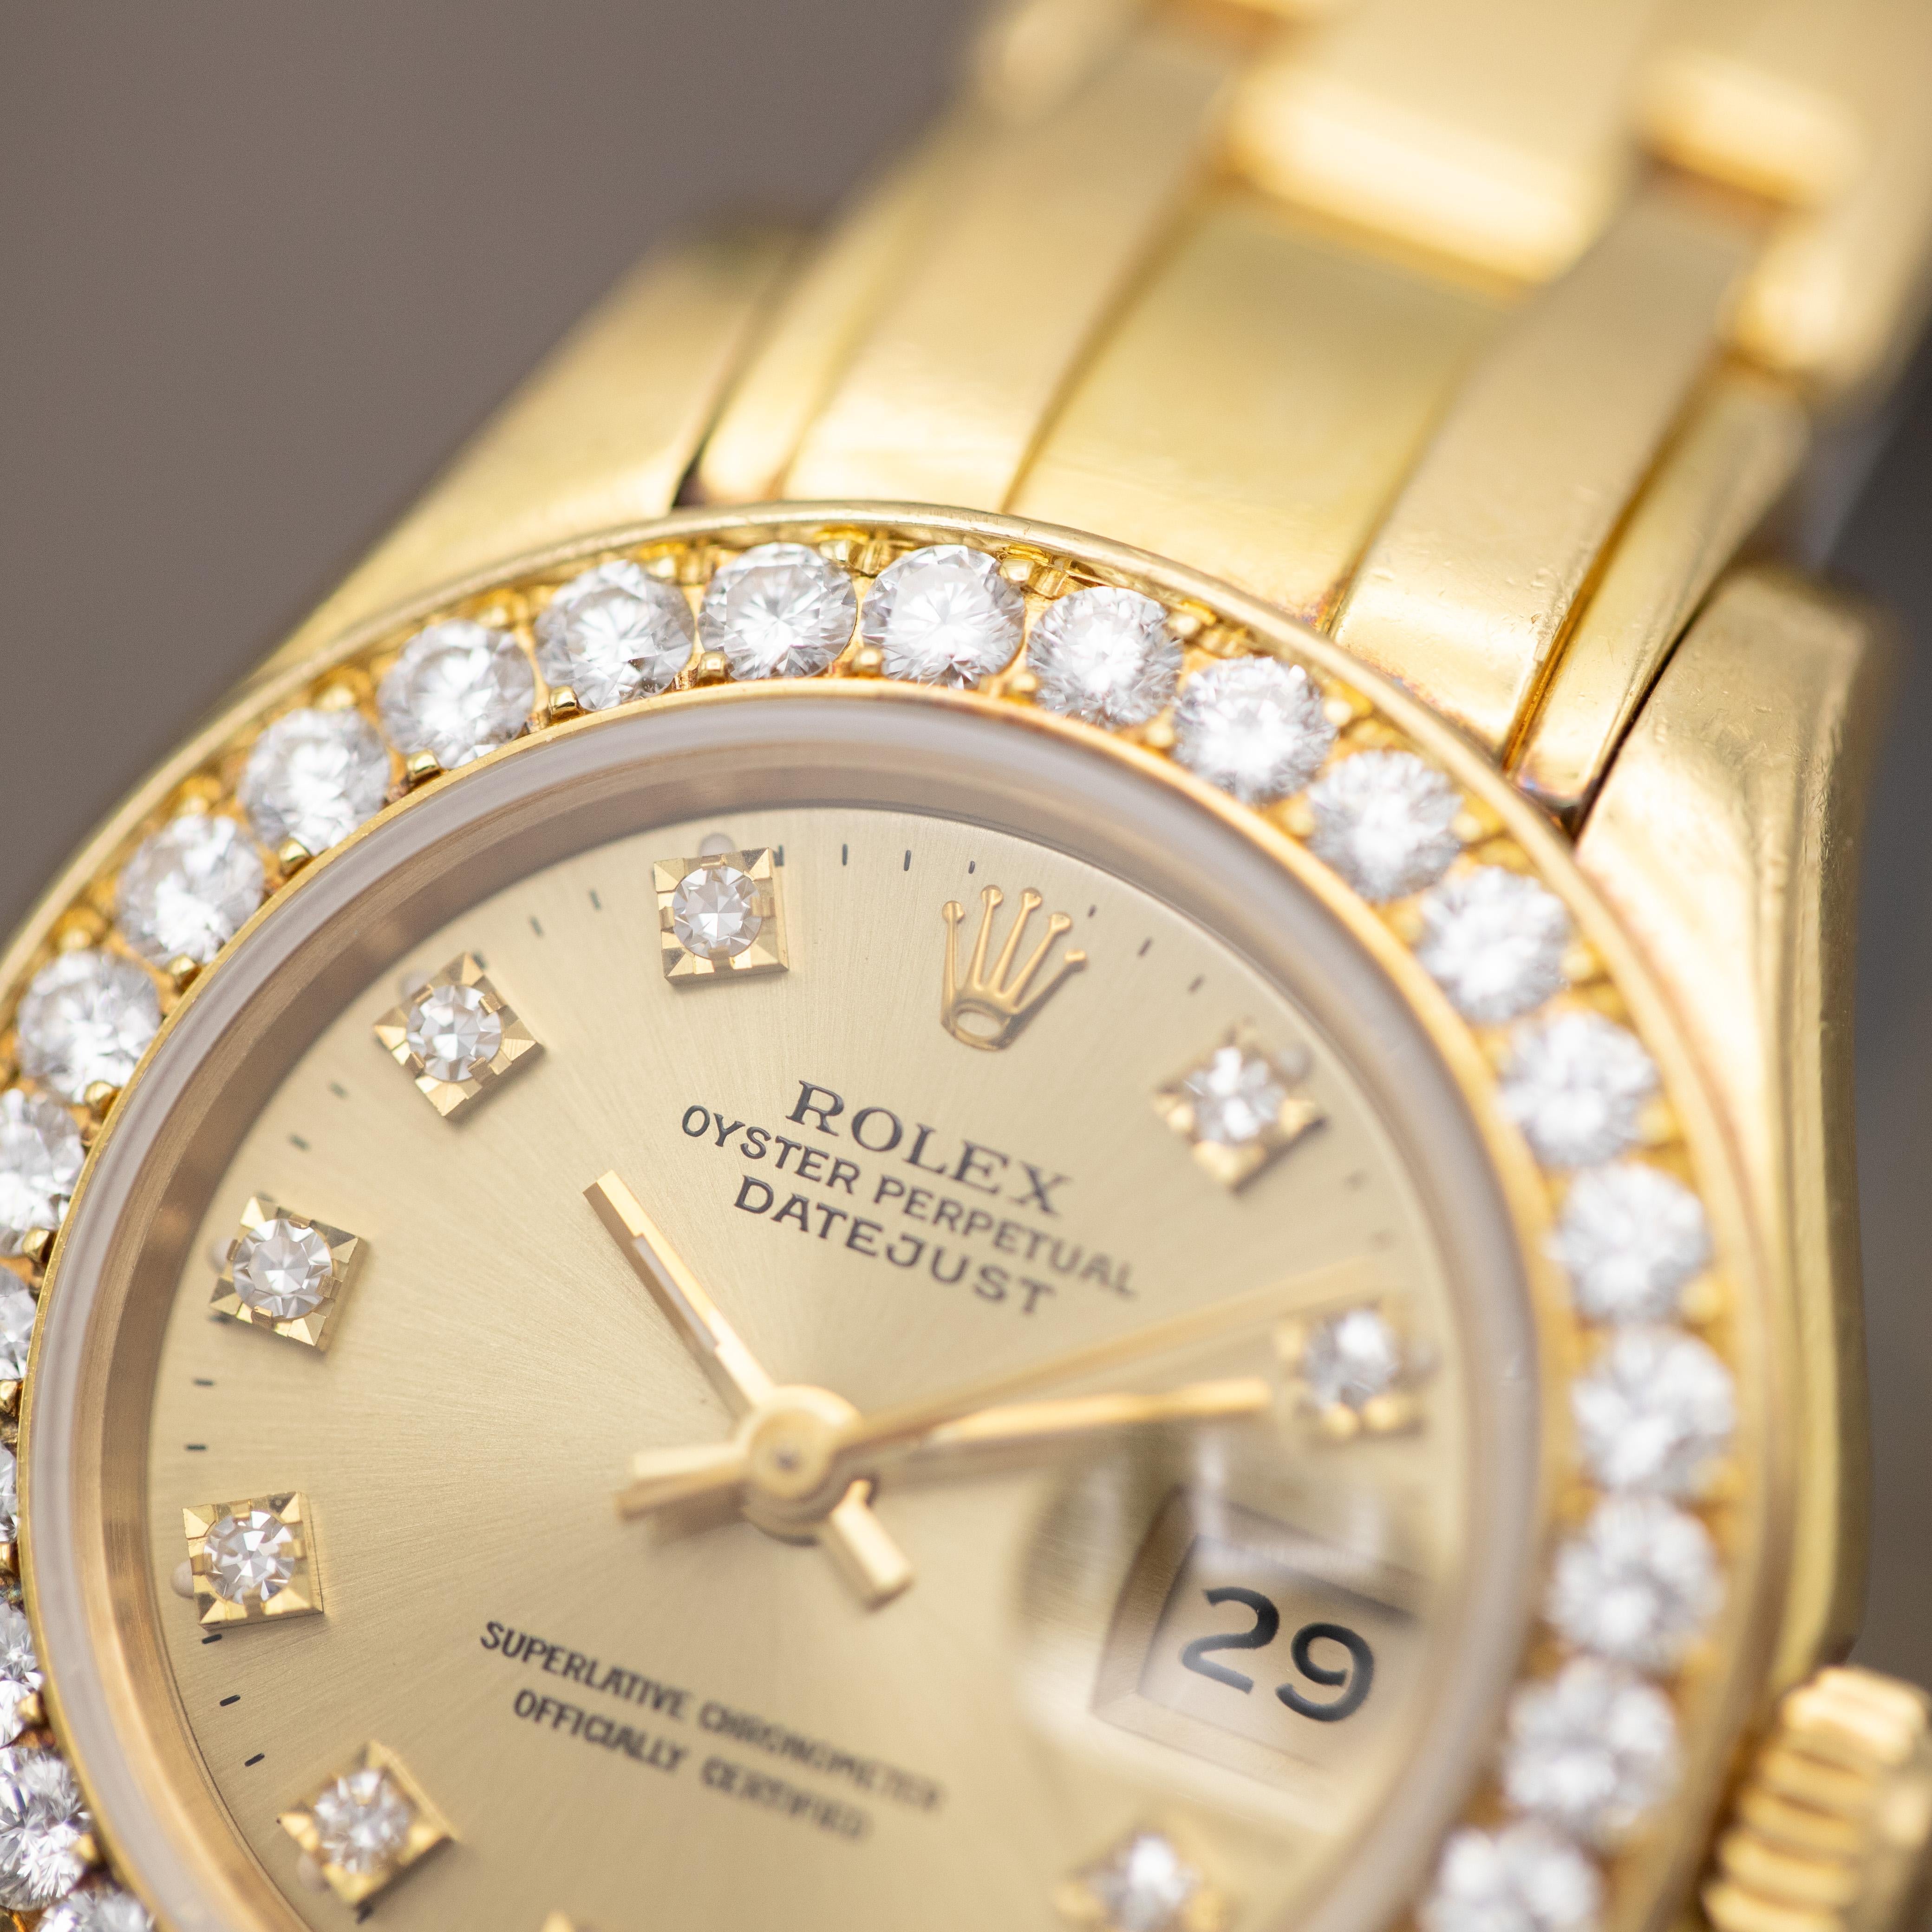 Brilliant Cut Rolex Lady Datejust Pearlmaster Ladies' Watch - Factory Diamonds For Sale